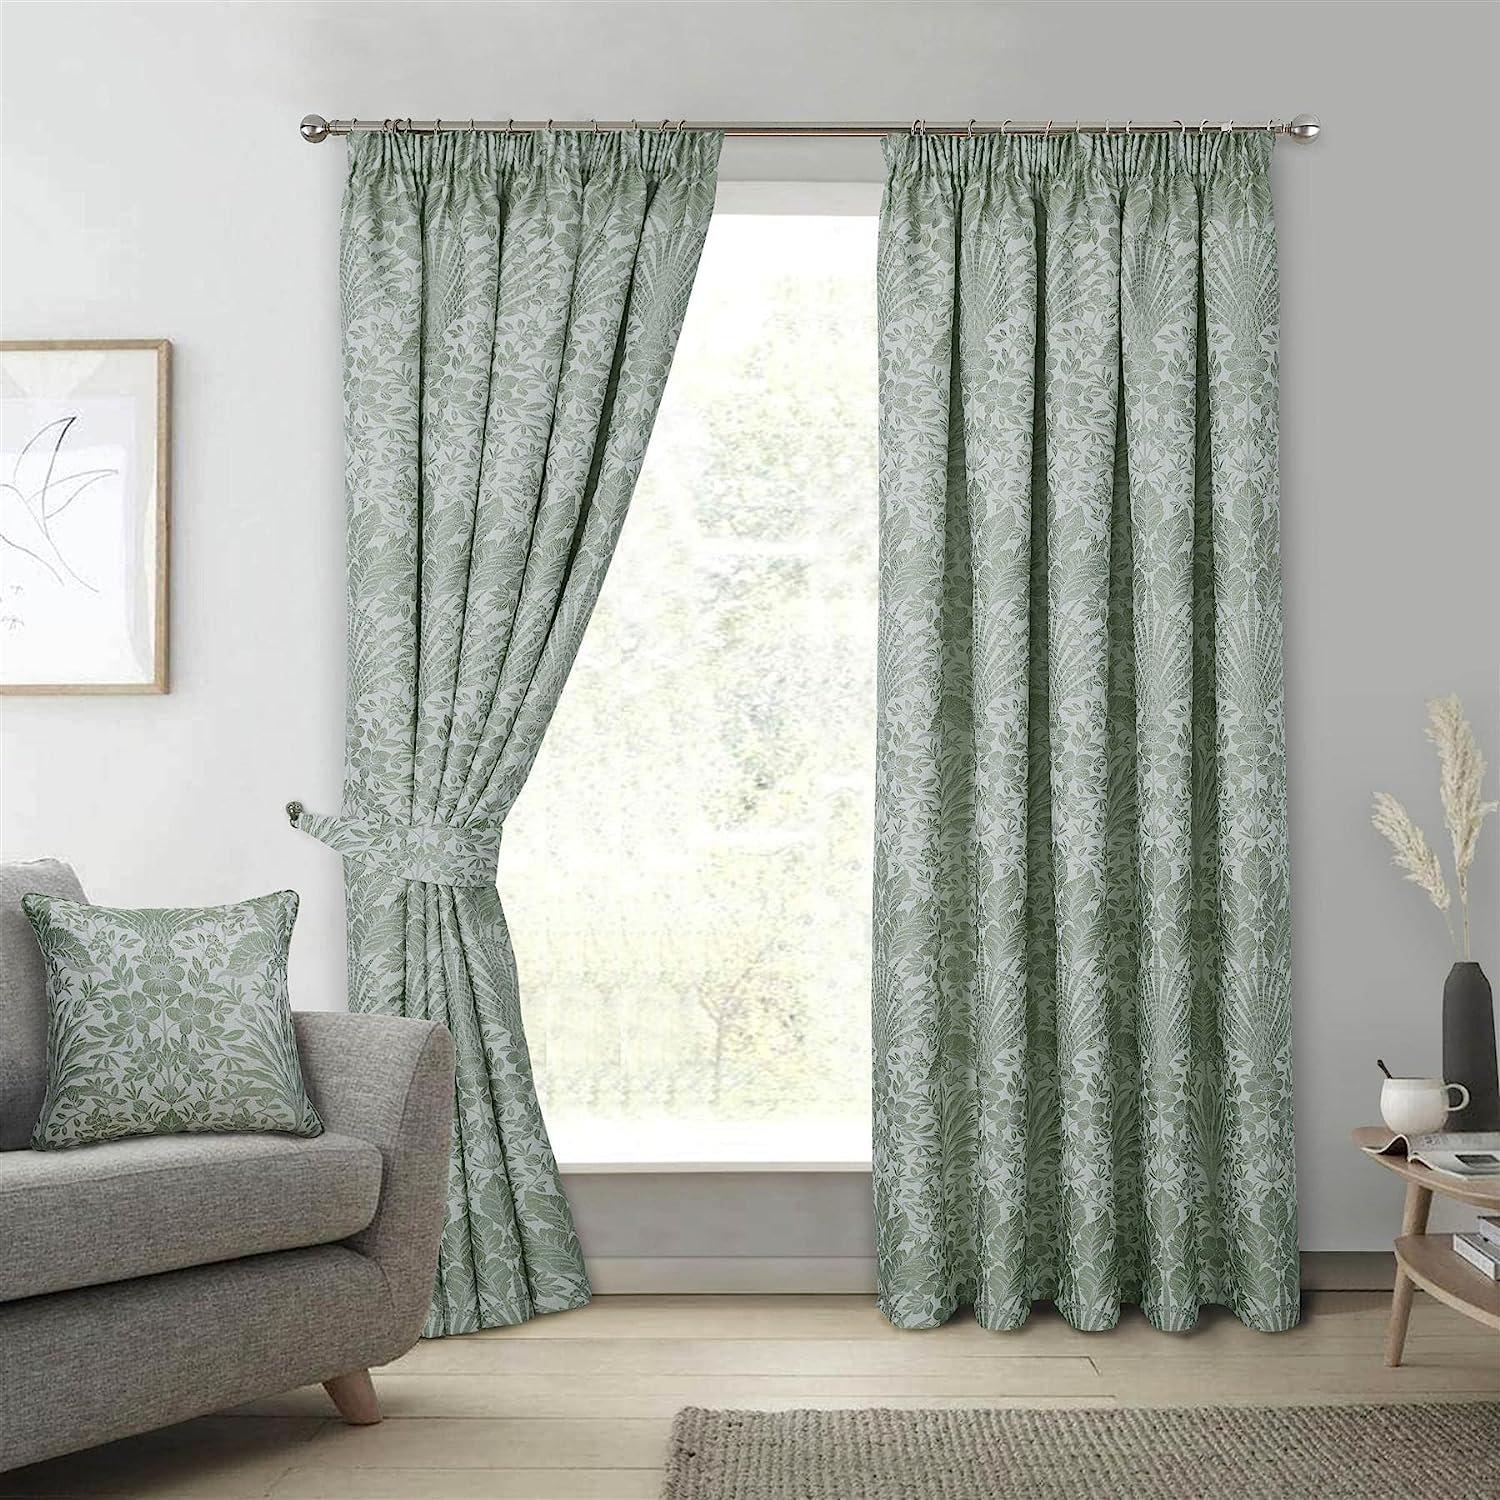 Keswick Floral Fully Lined Pencil Pleat Curtains